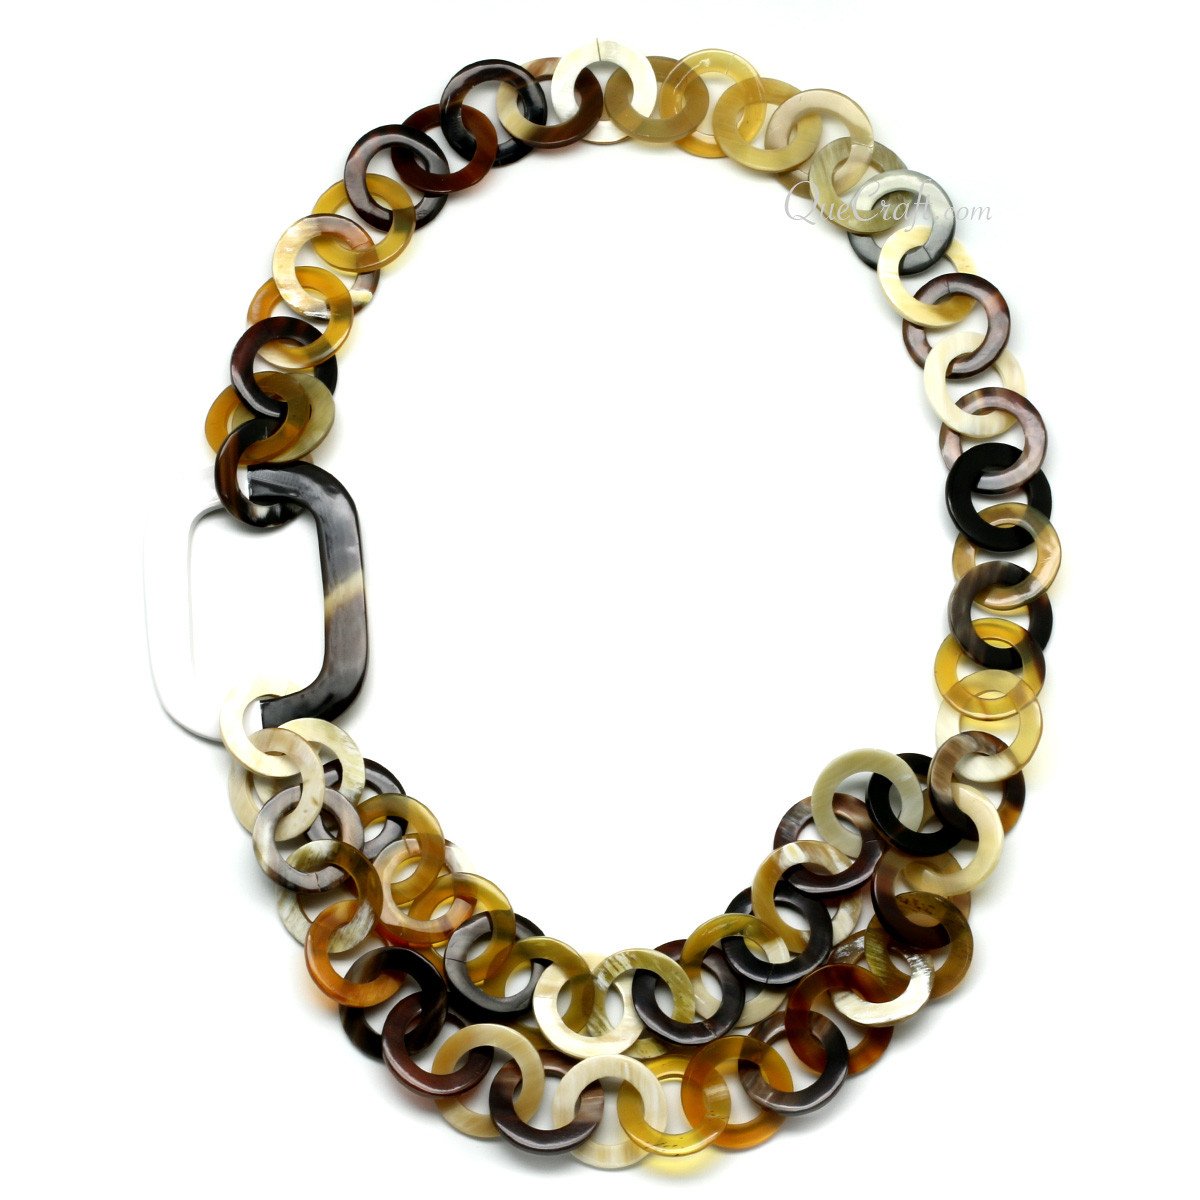 Horn & Lacquer Chain Necklace #11461 - HORN JEWELRY